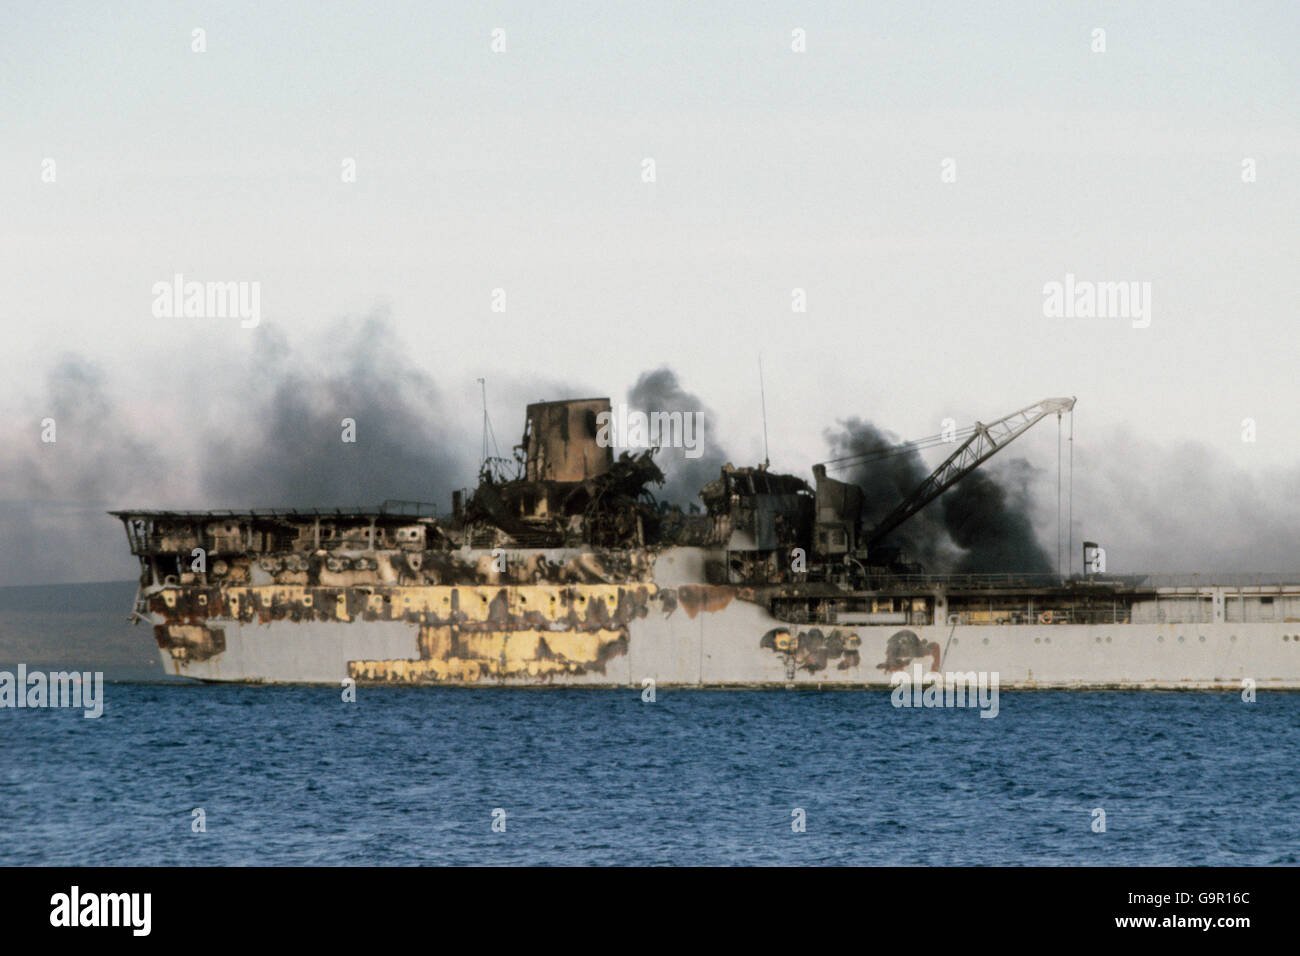 Smoke rising from the smouldering burnt out remains of the Sir Galahad. Stock Photo